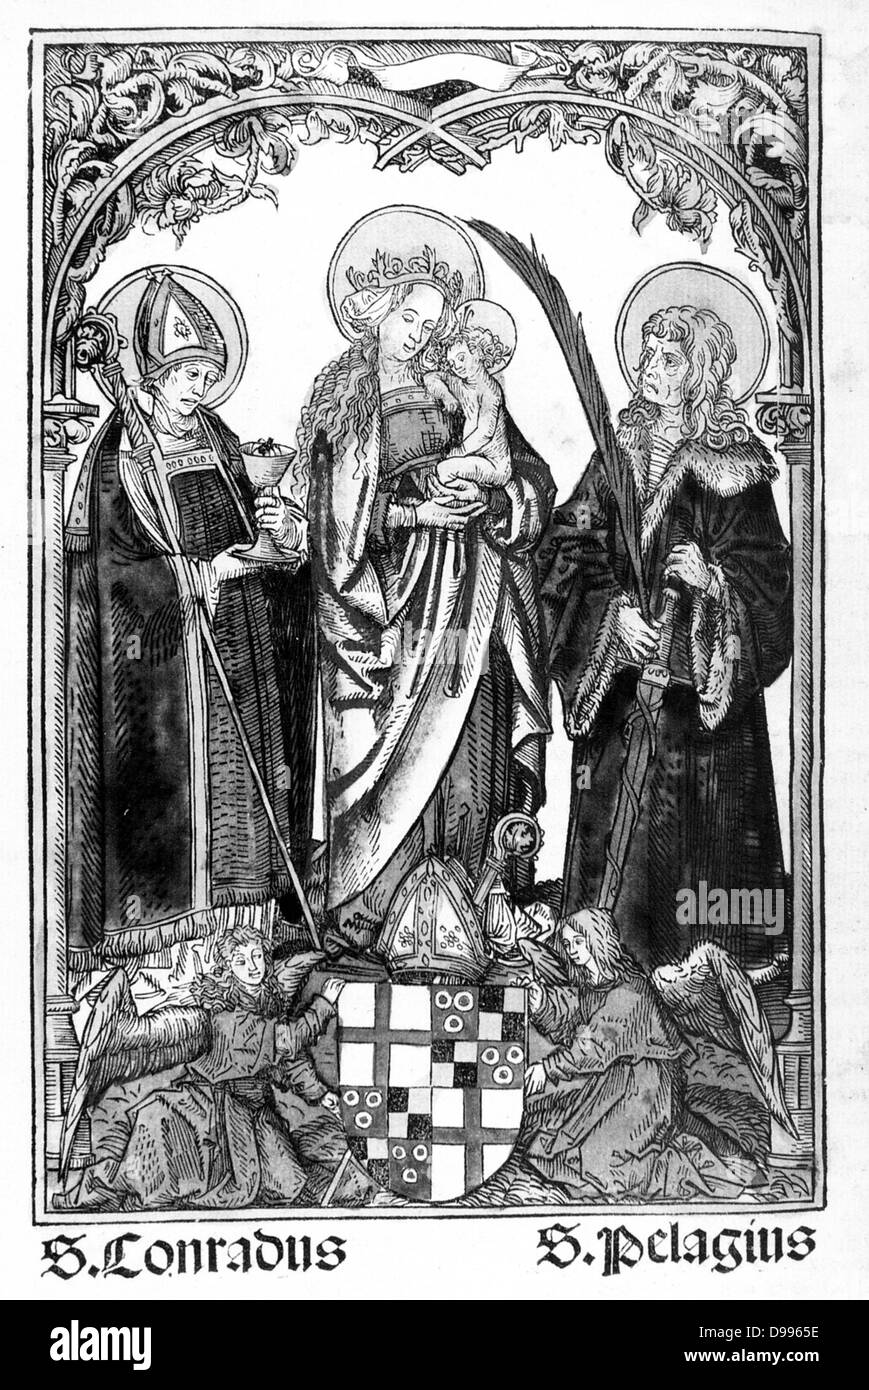 Conrad, Mary and St. Pelagius, including the coat of arms of Bishop Hugh of High Landsberg (term 1495-1530). Stock Photo